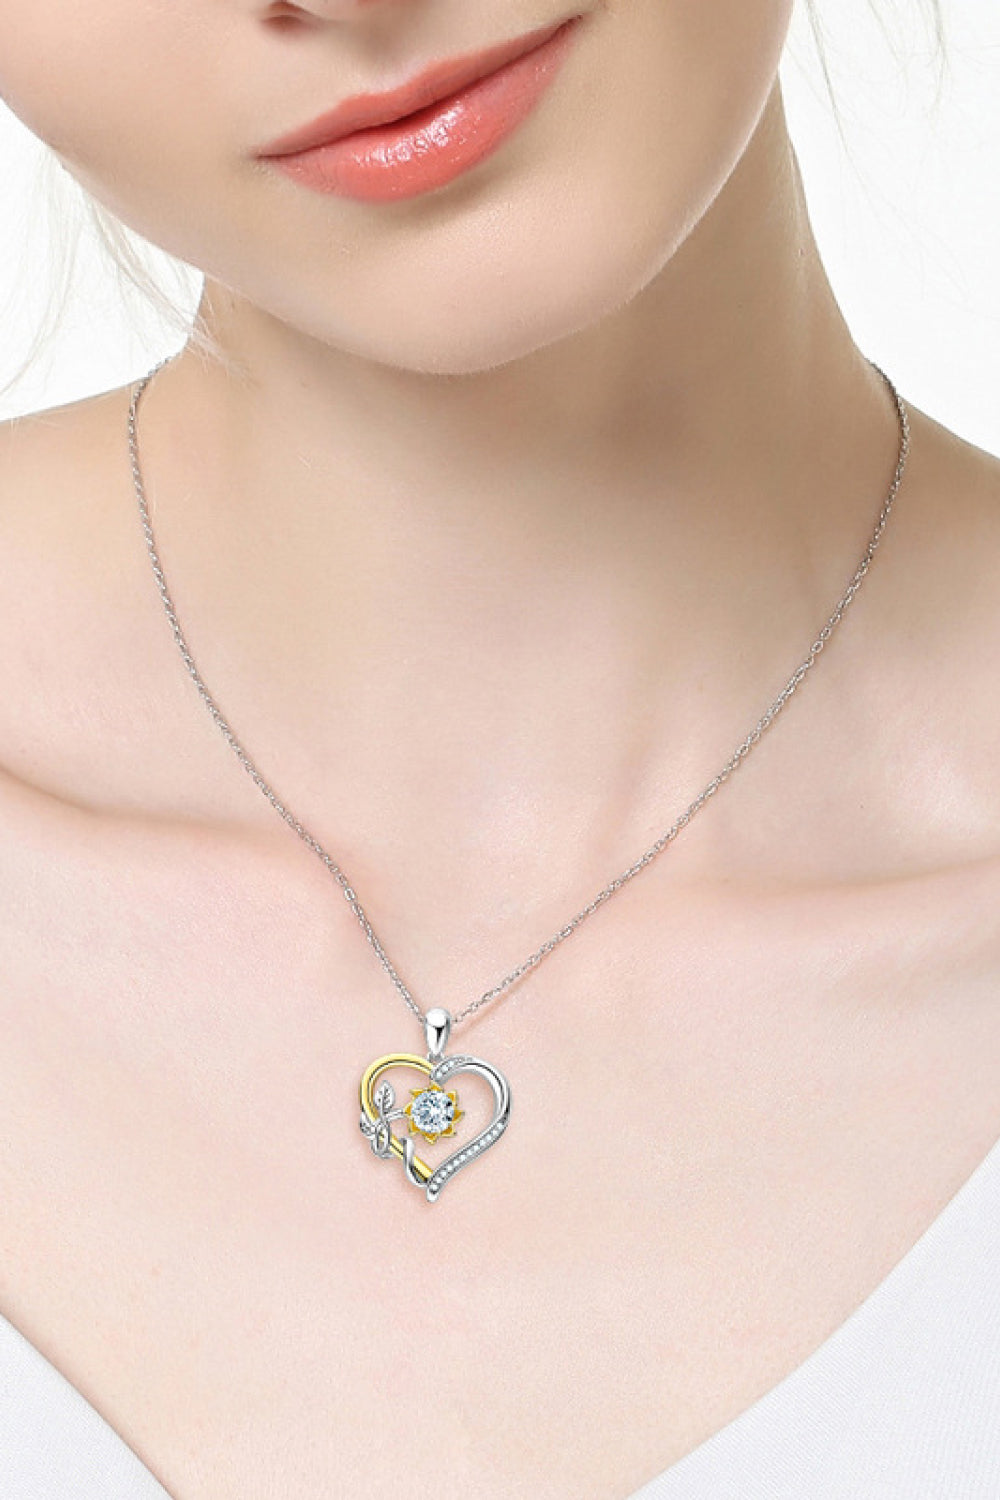 Two-Tone 1 Carat Moissanite Heart Pendant Necklace-Necklaces-Inspired by Justeen-Women's Clothing Boutique in Chicago, Illinois